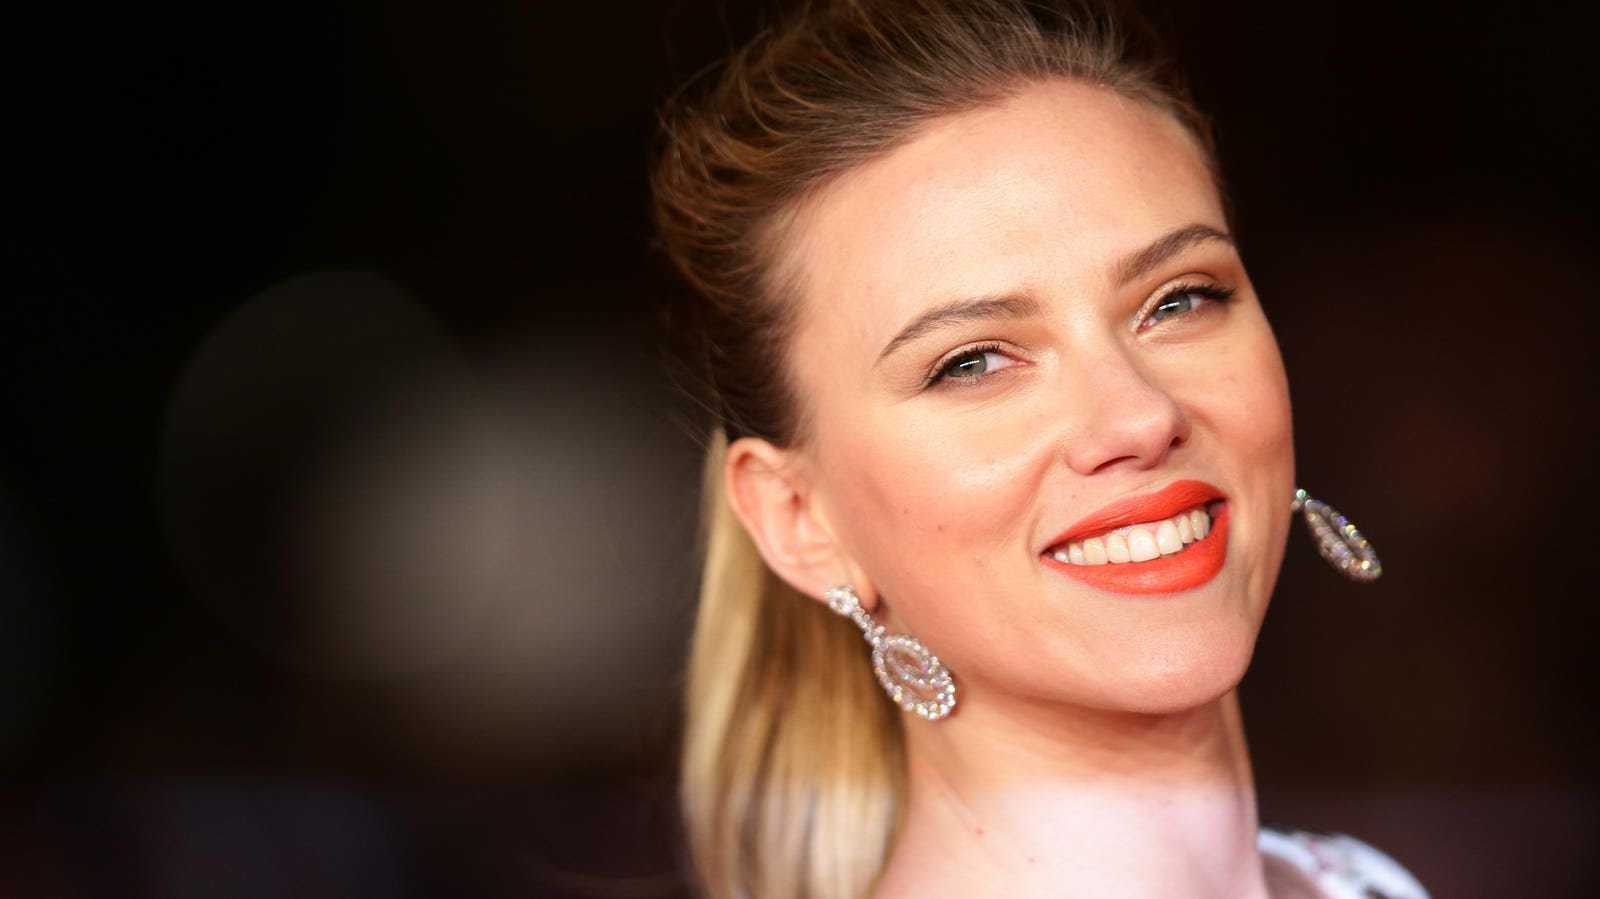 Here’s Why Other Celebrities Could Face Problems With AI Voice Cloning—Not Just Scarlett Johansson